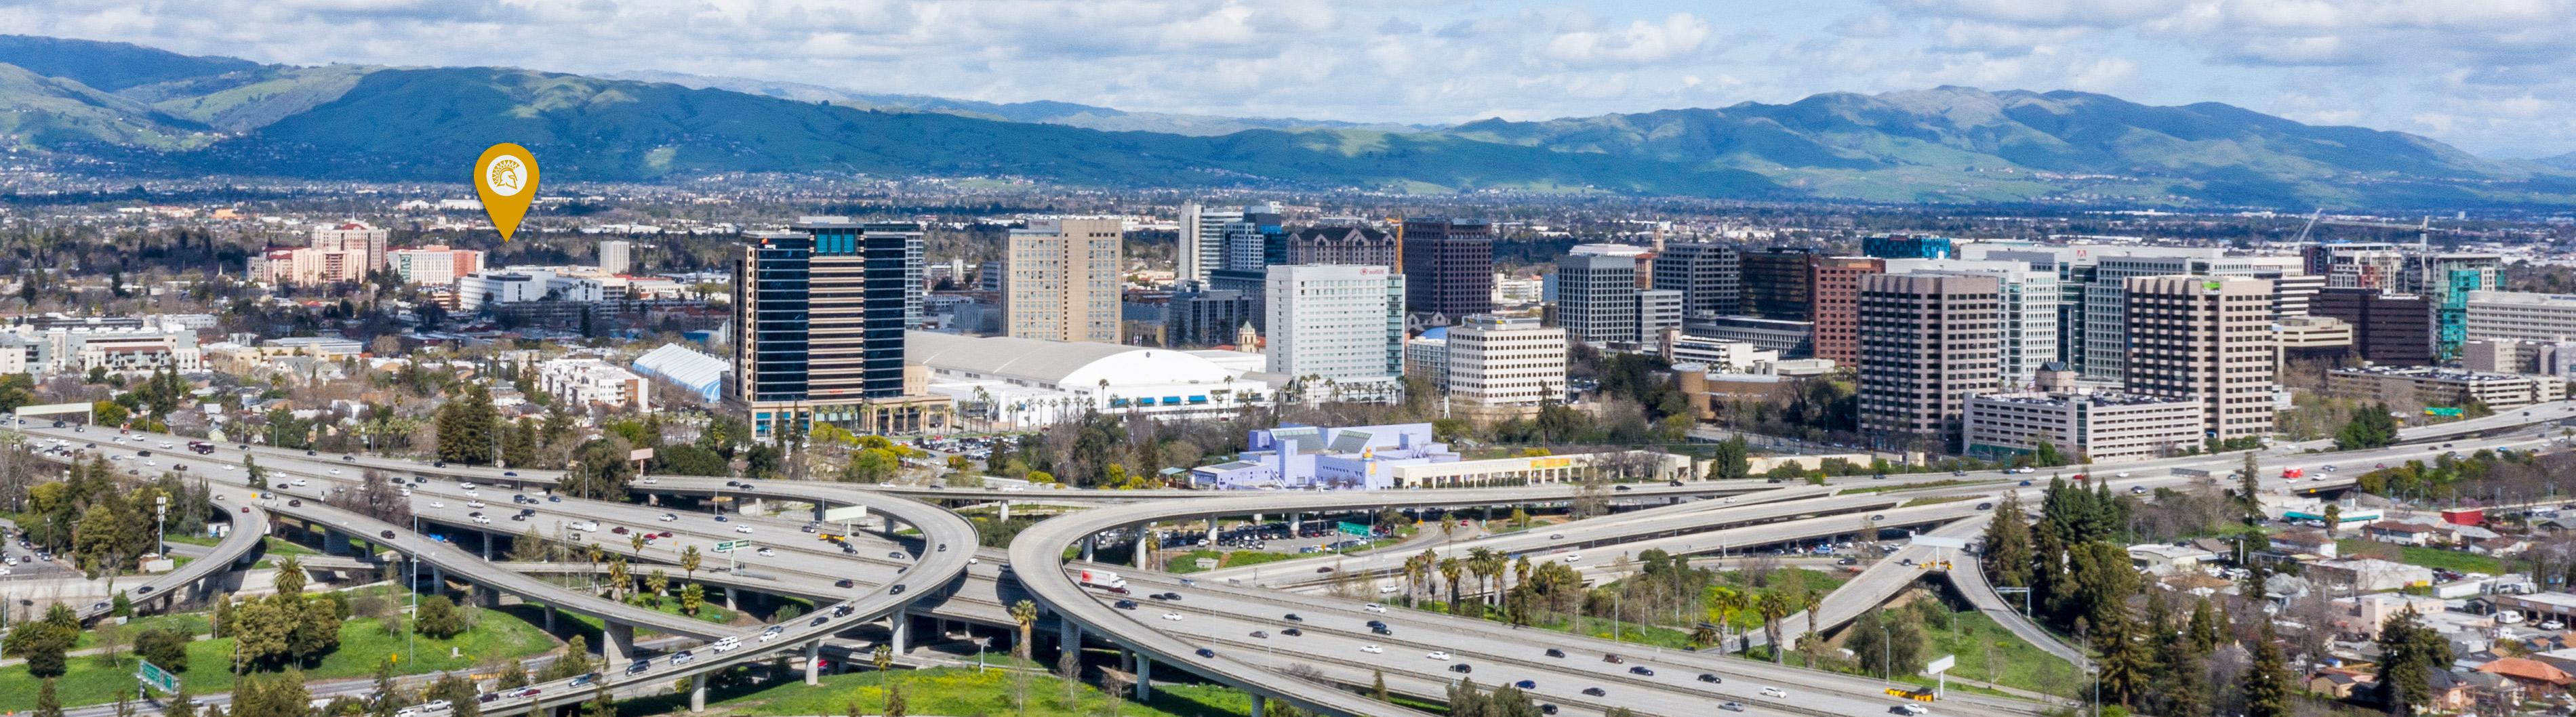 View of San Jose, Northern California's largest city.